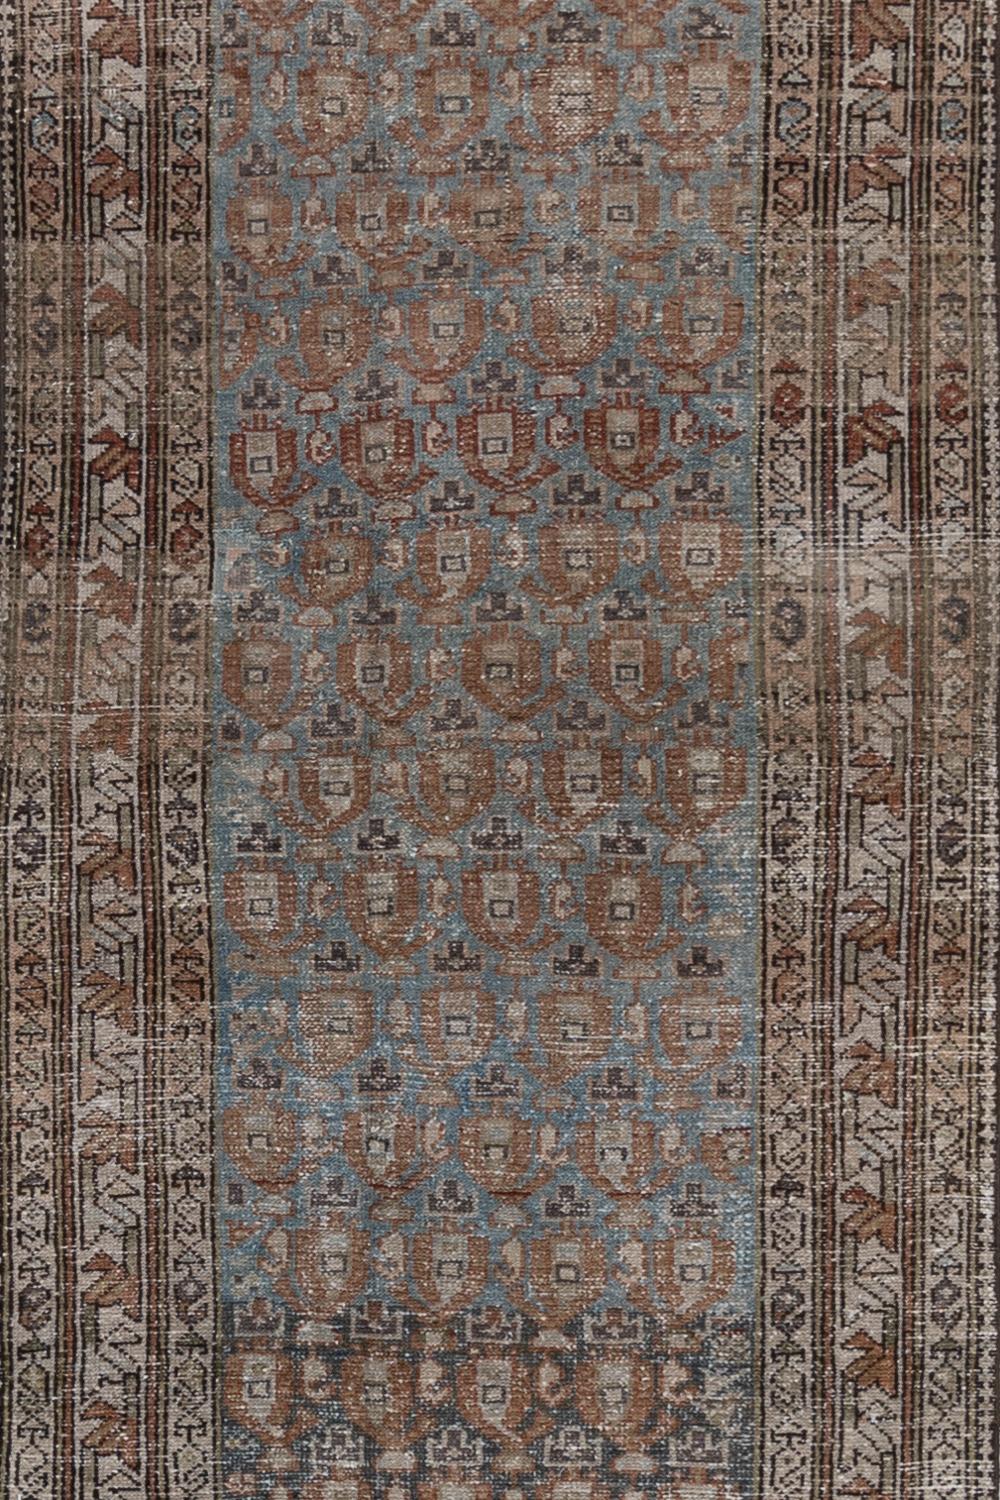 Age: 1920

Pile: Low

Wear Notes: 4

Material: Wool on Cotton

Vintage rugs are made by hand over the course of months, sometimes years. Their imperfections and wear are evidence of the hard working human hands that made them and the